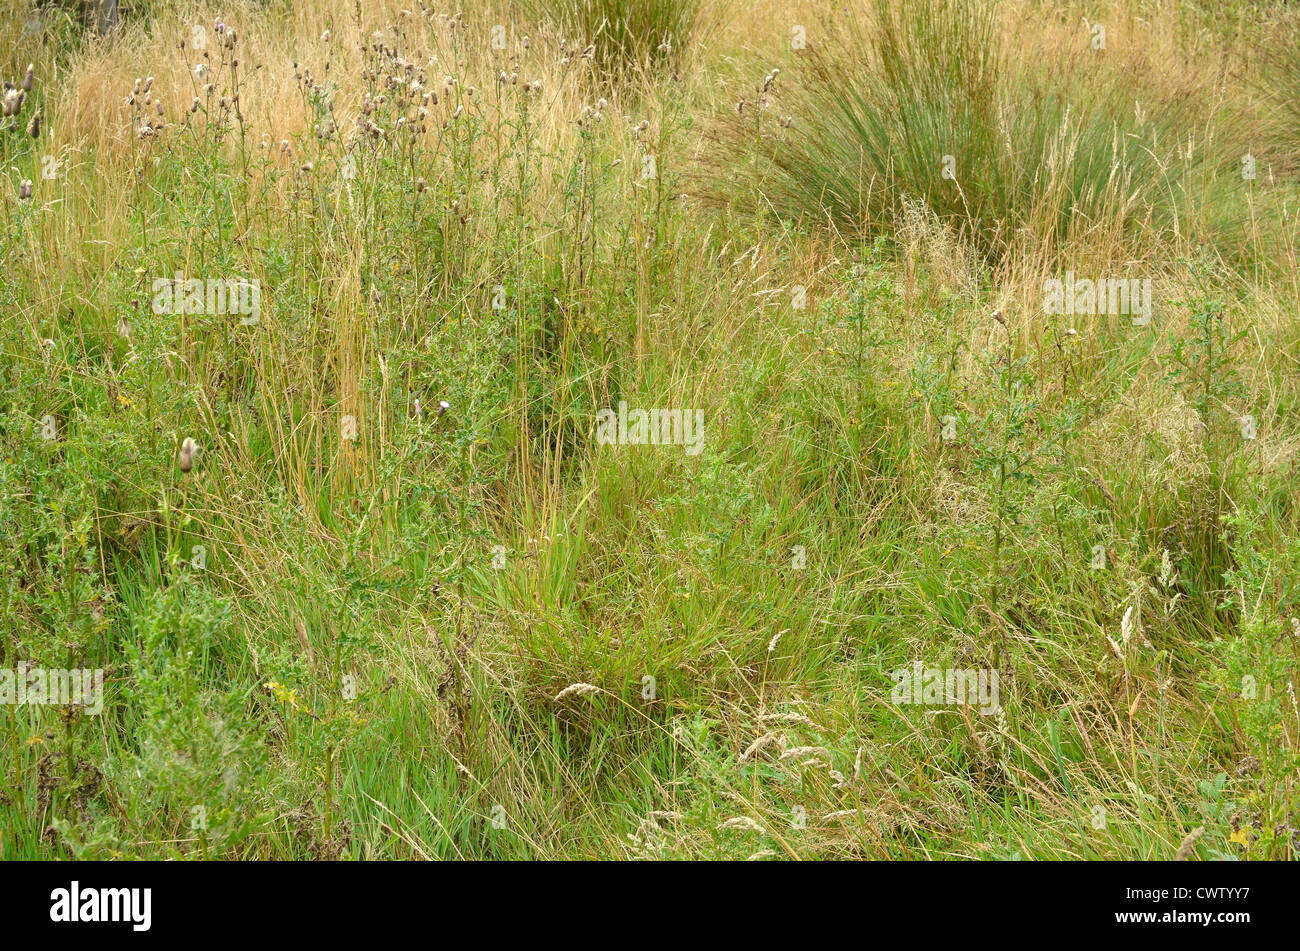 Patch of rough grassland, wild grasses, with field thistles / Cirsium arvense and juncus rush present in the background. Stock Photo